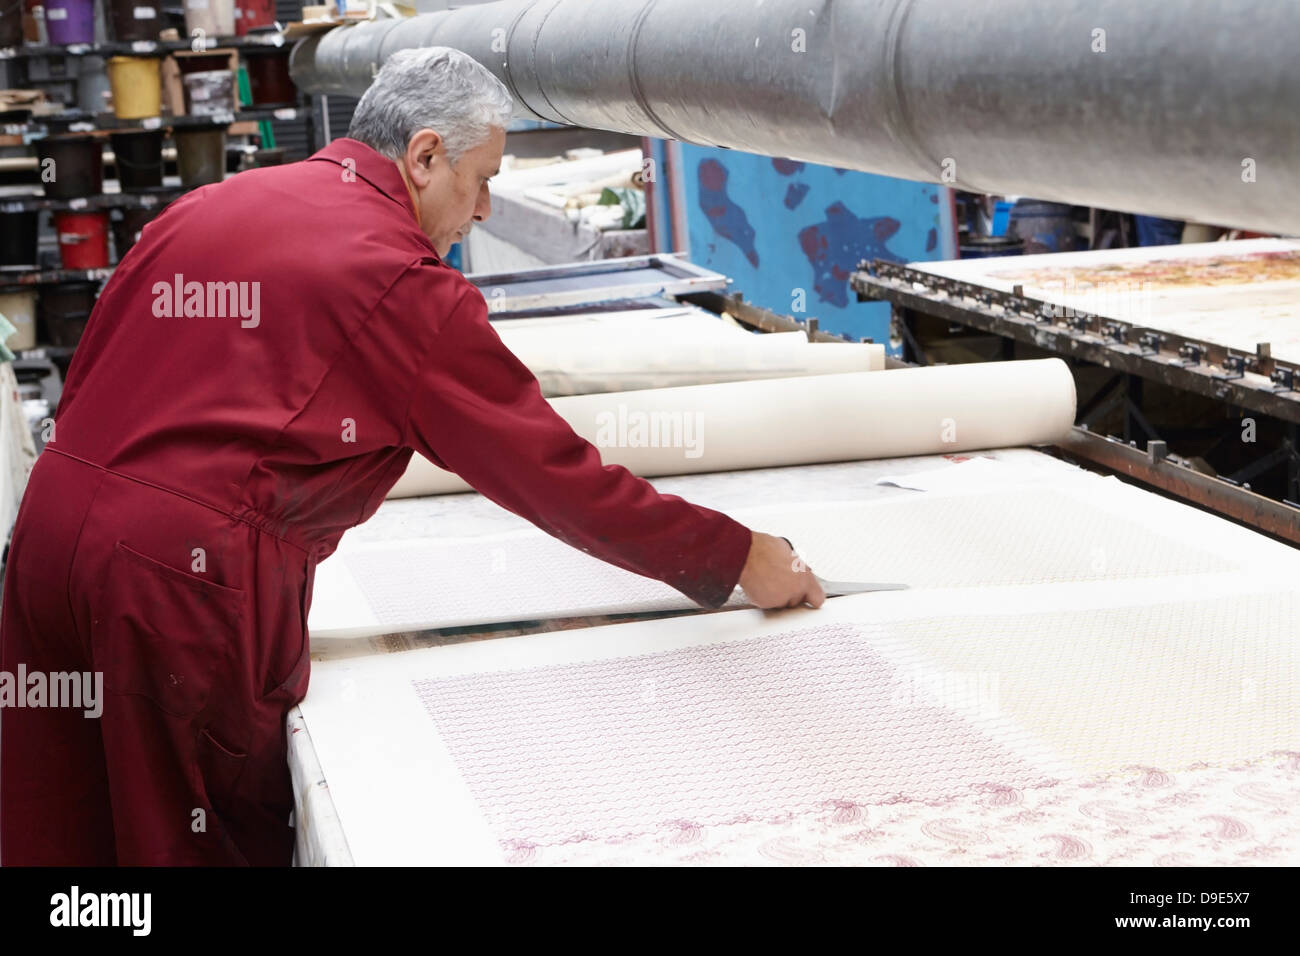 Man cutting fabric in textiles factory Stock Photo